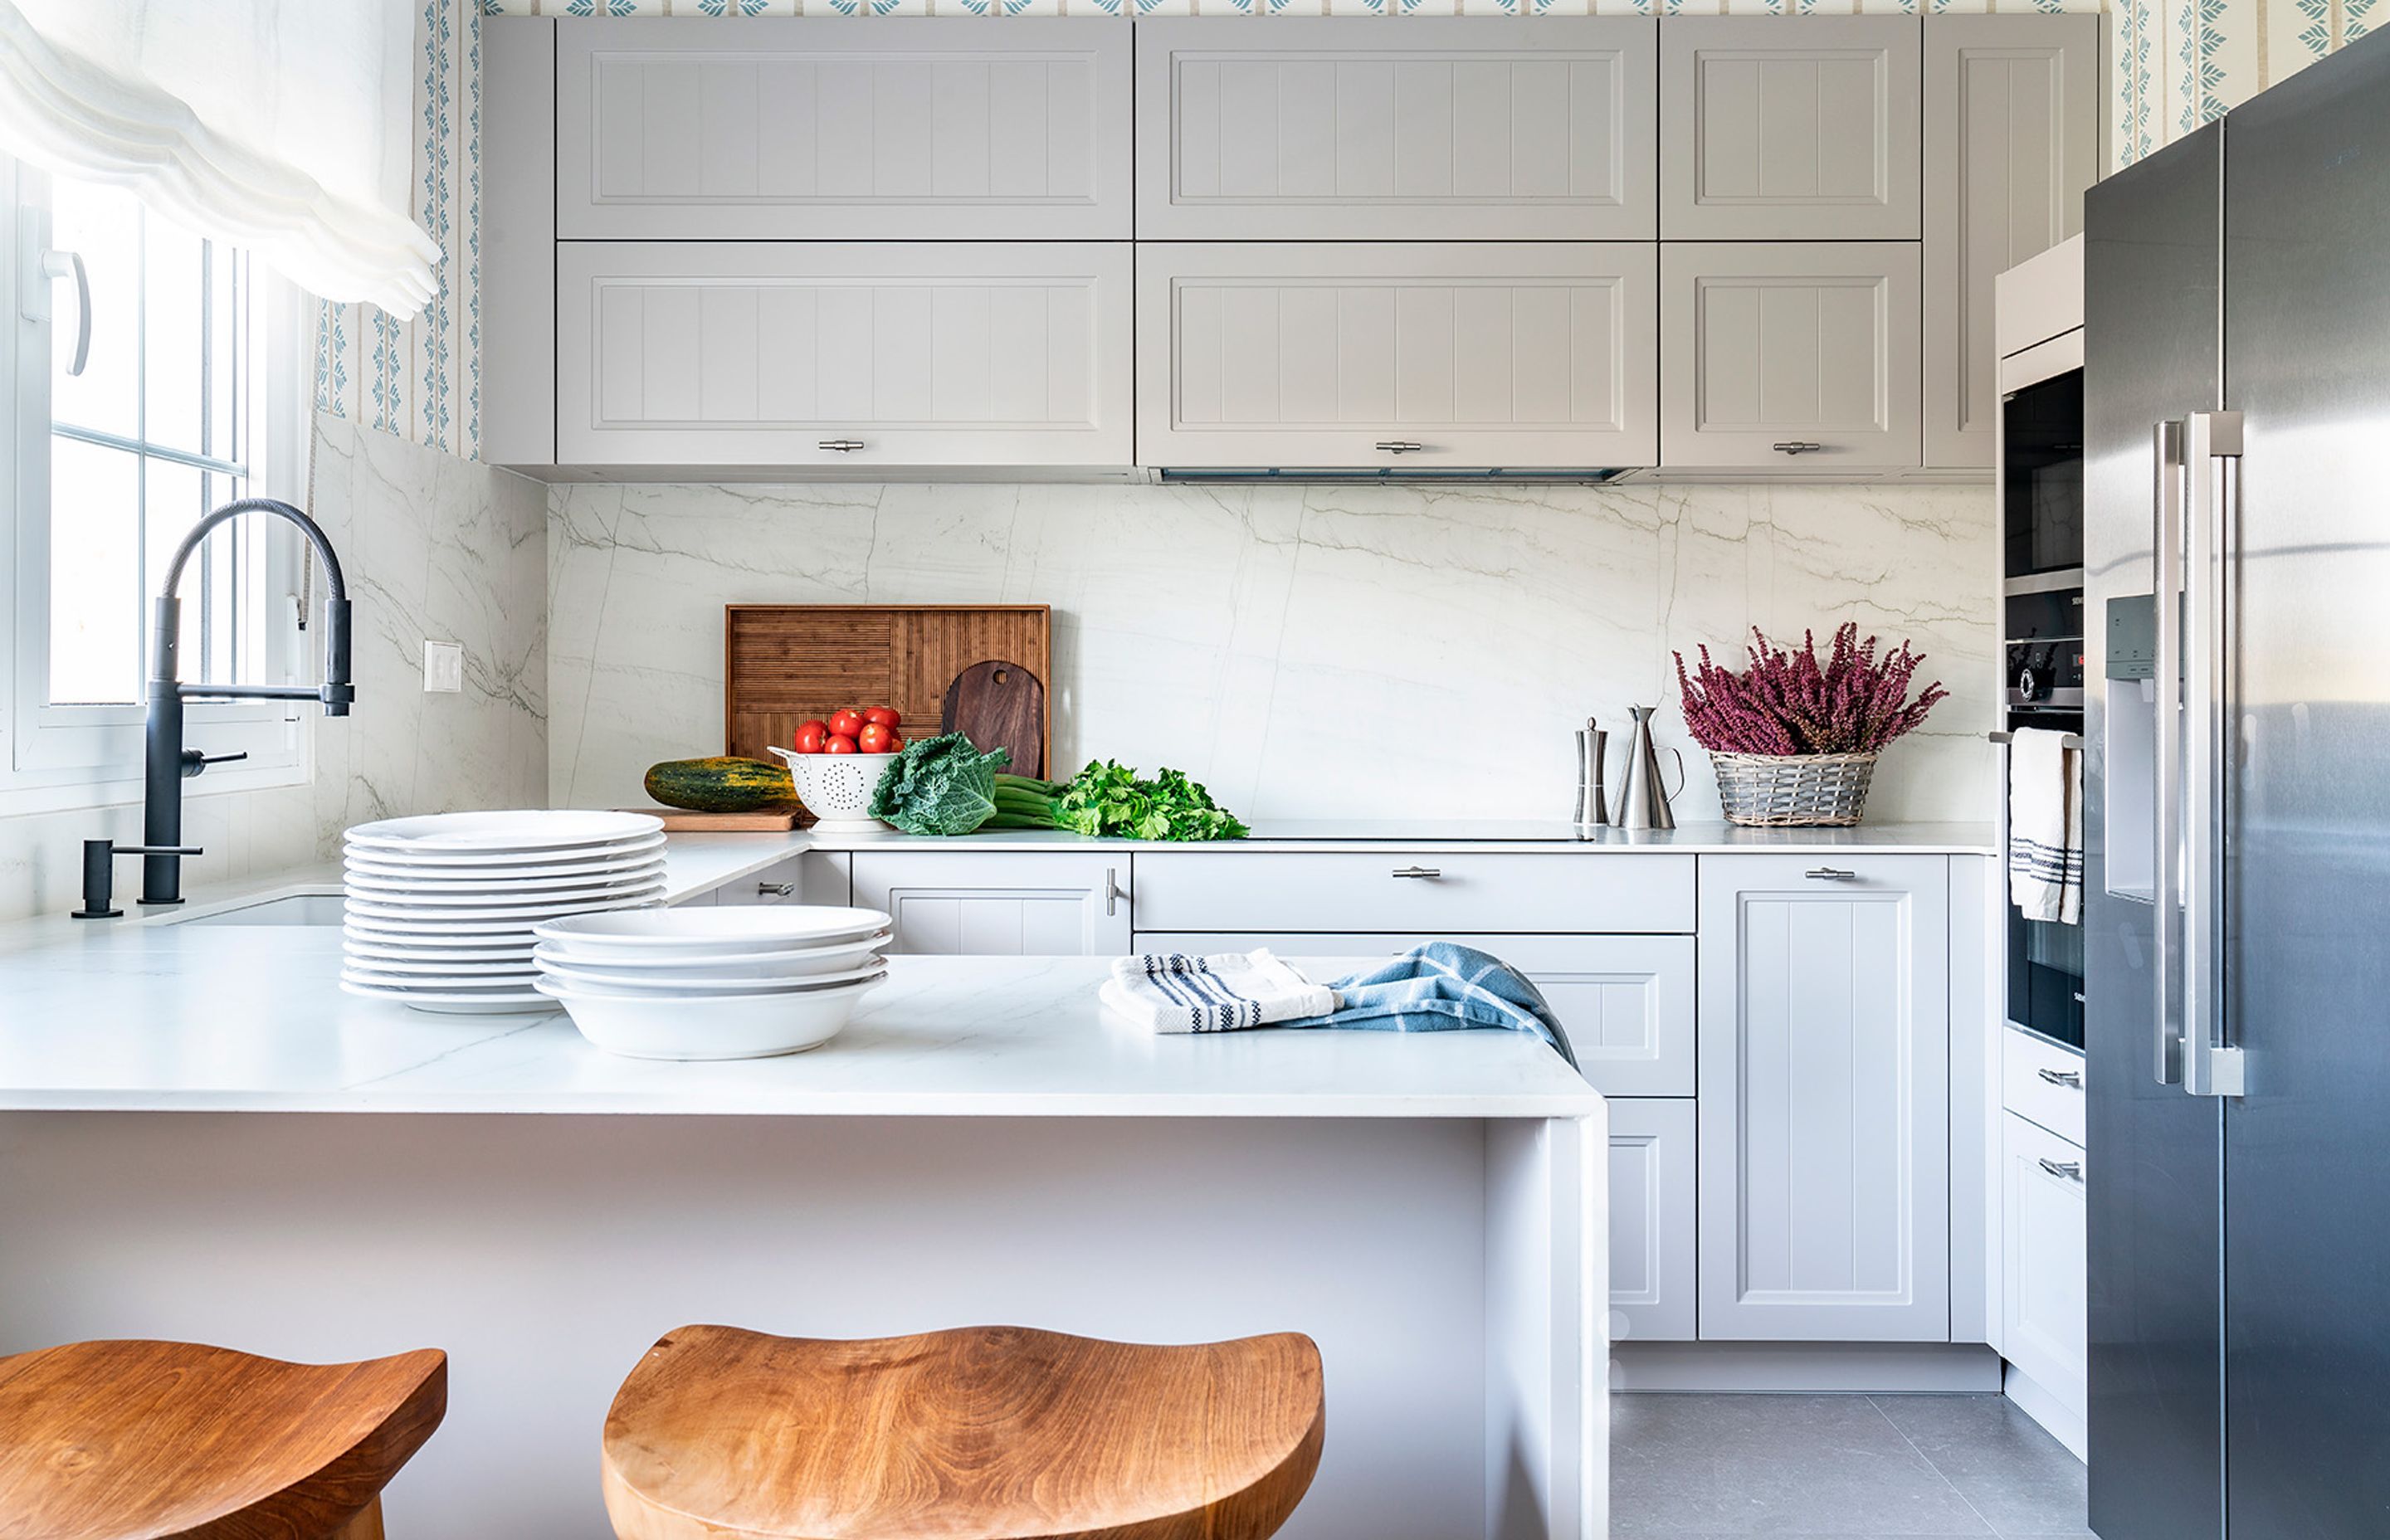 Nordic style kitchens: a must that never disappoints